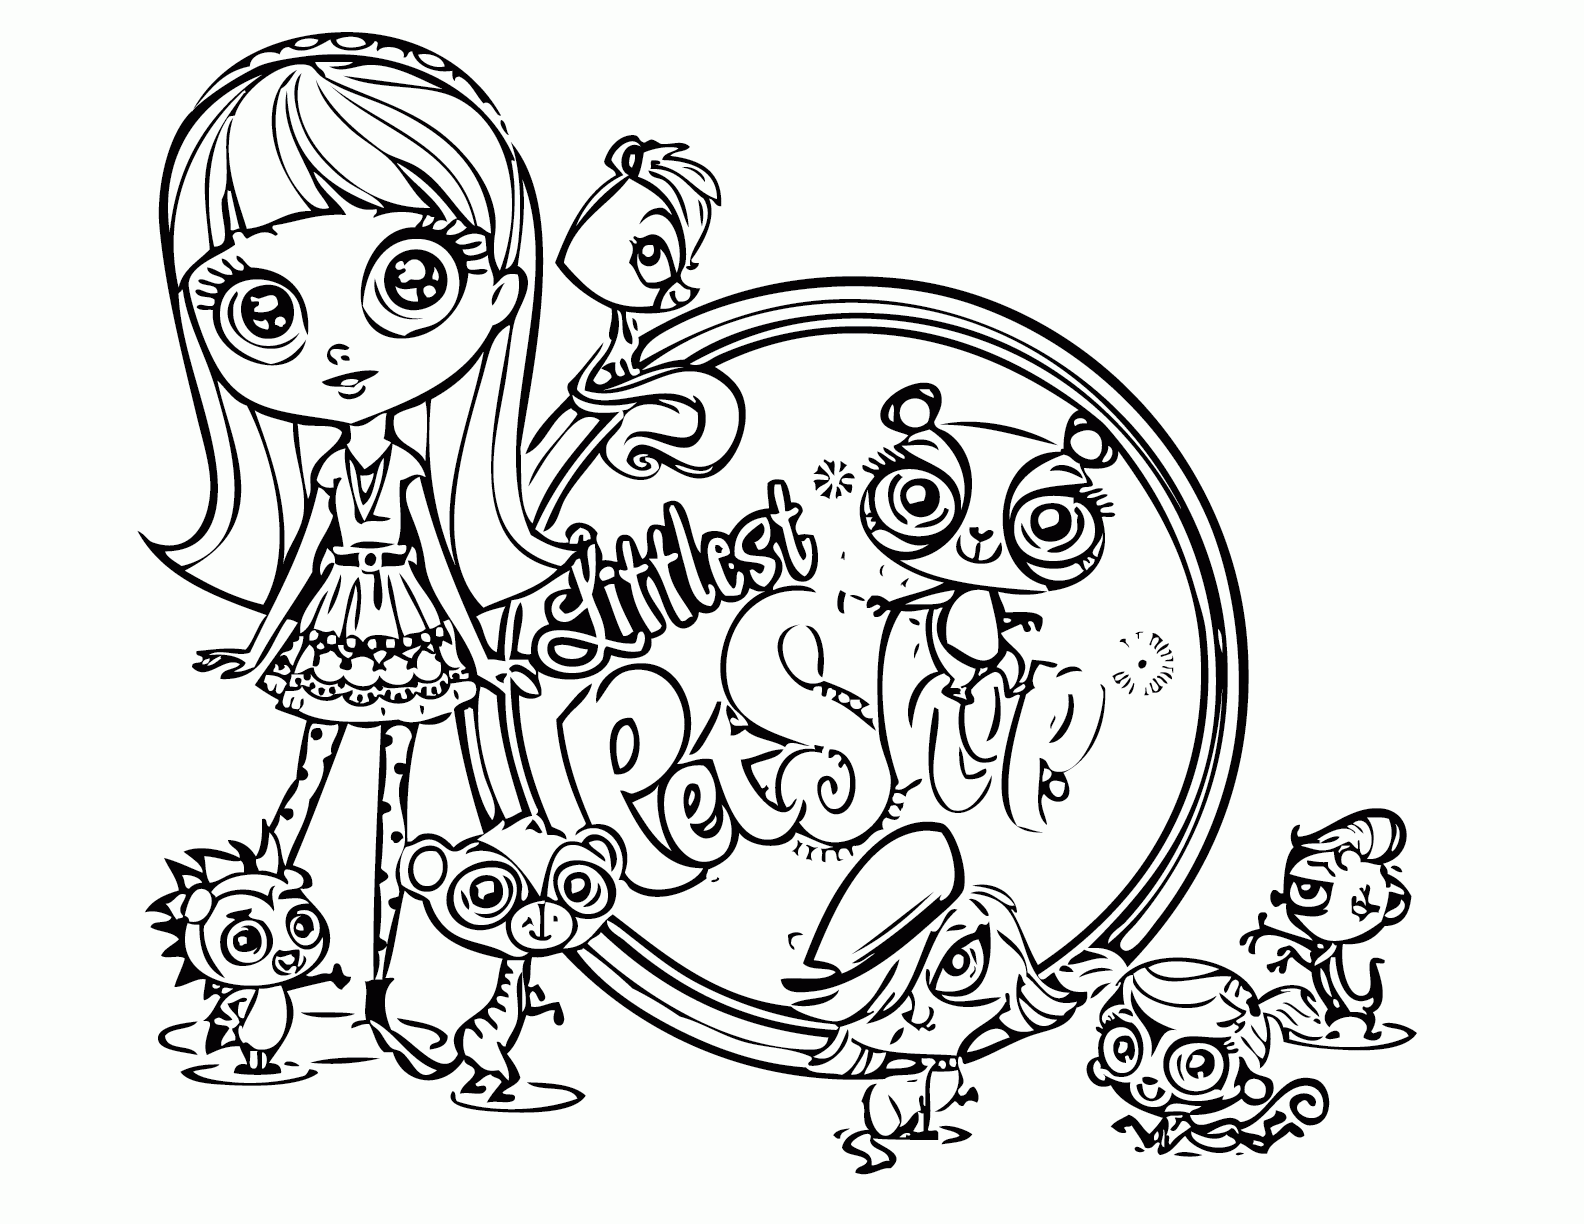 8 Pics of Store Coloring Pages - Clip Art Black and White Store ...